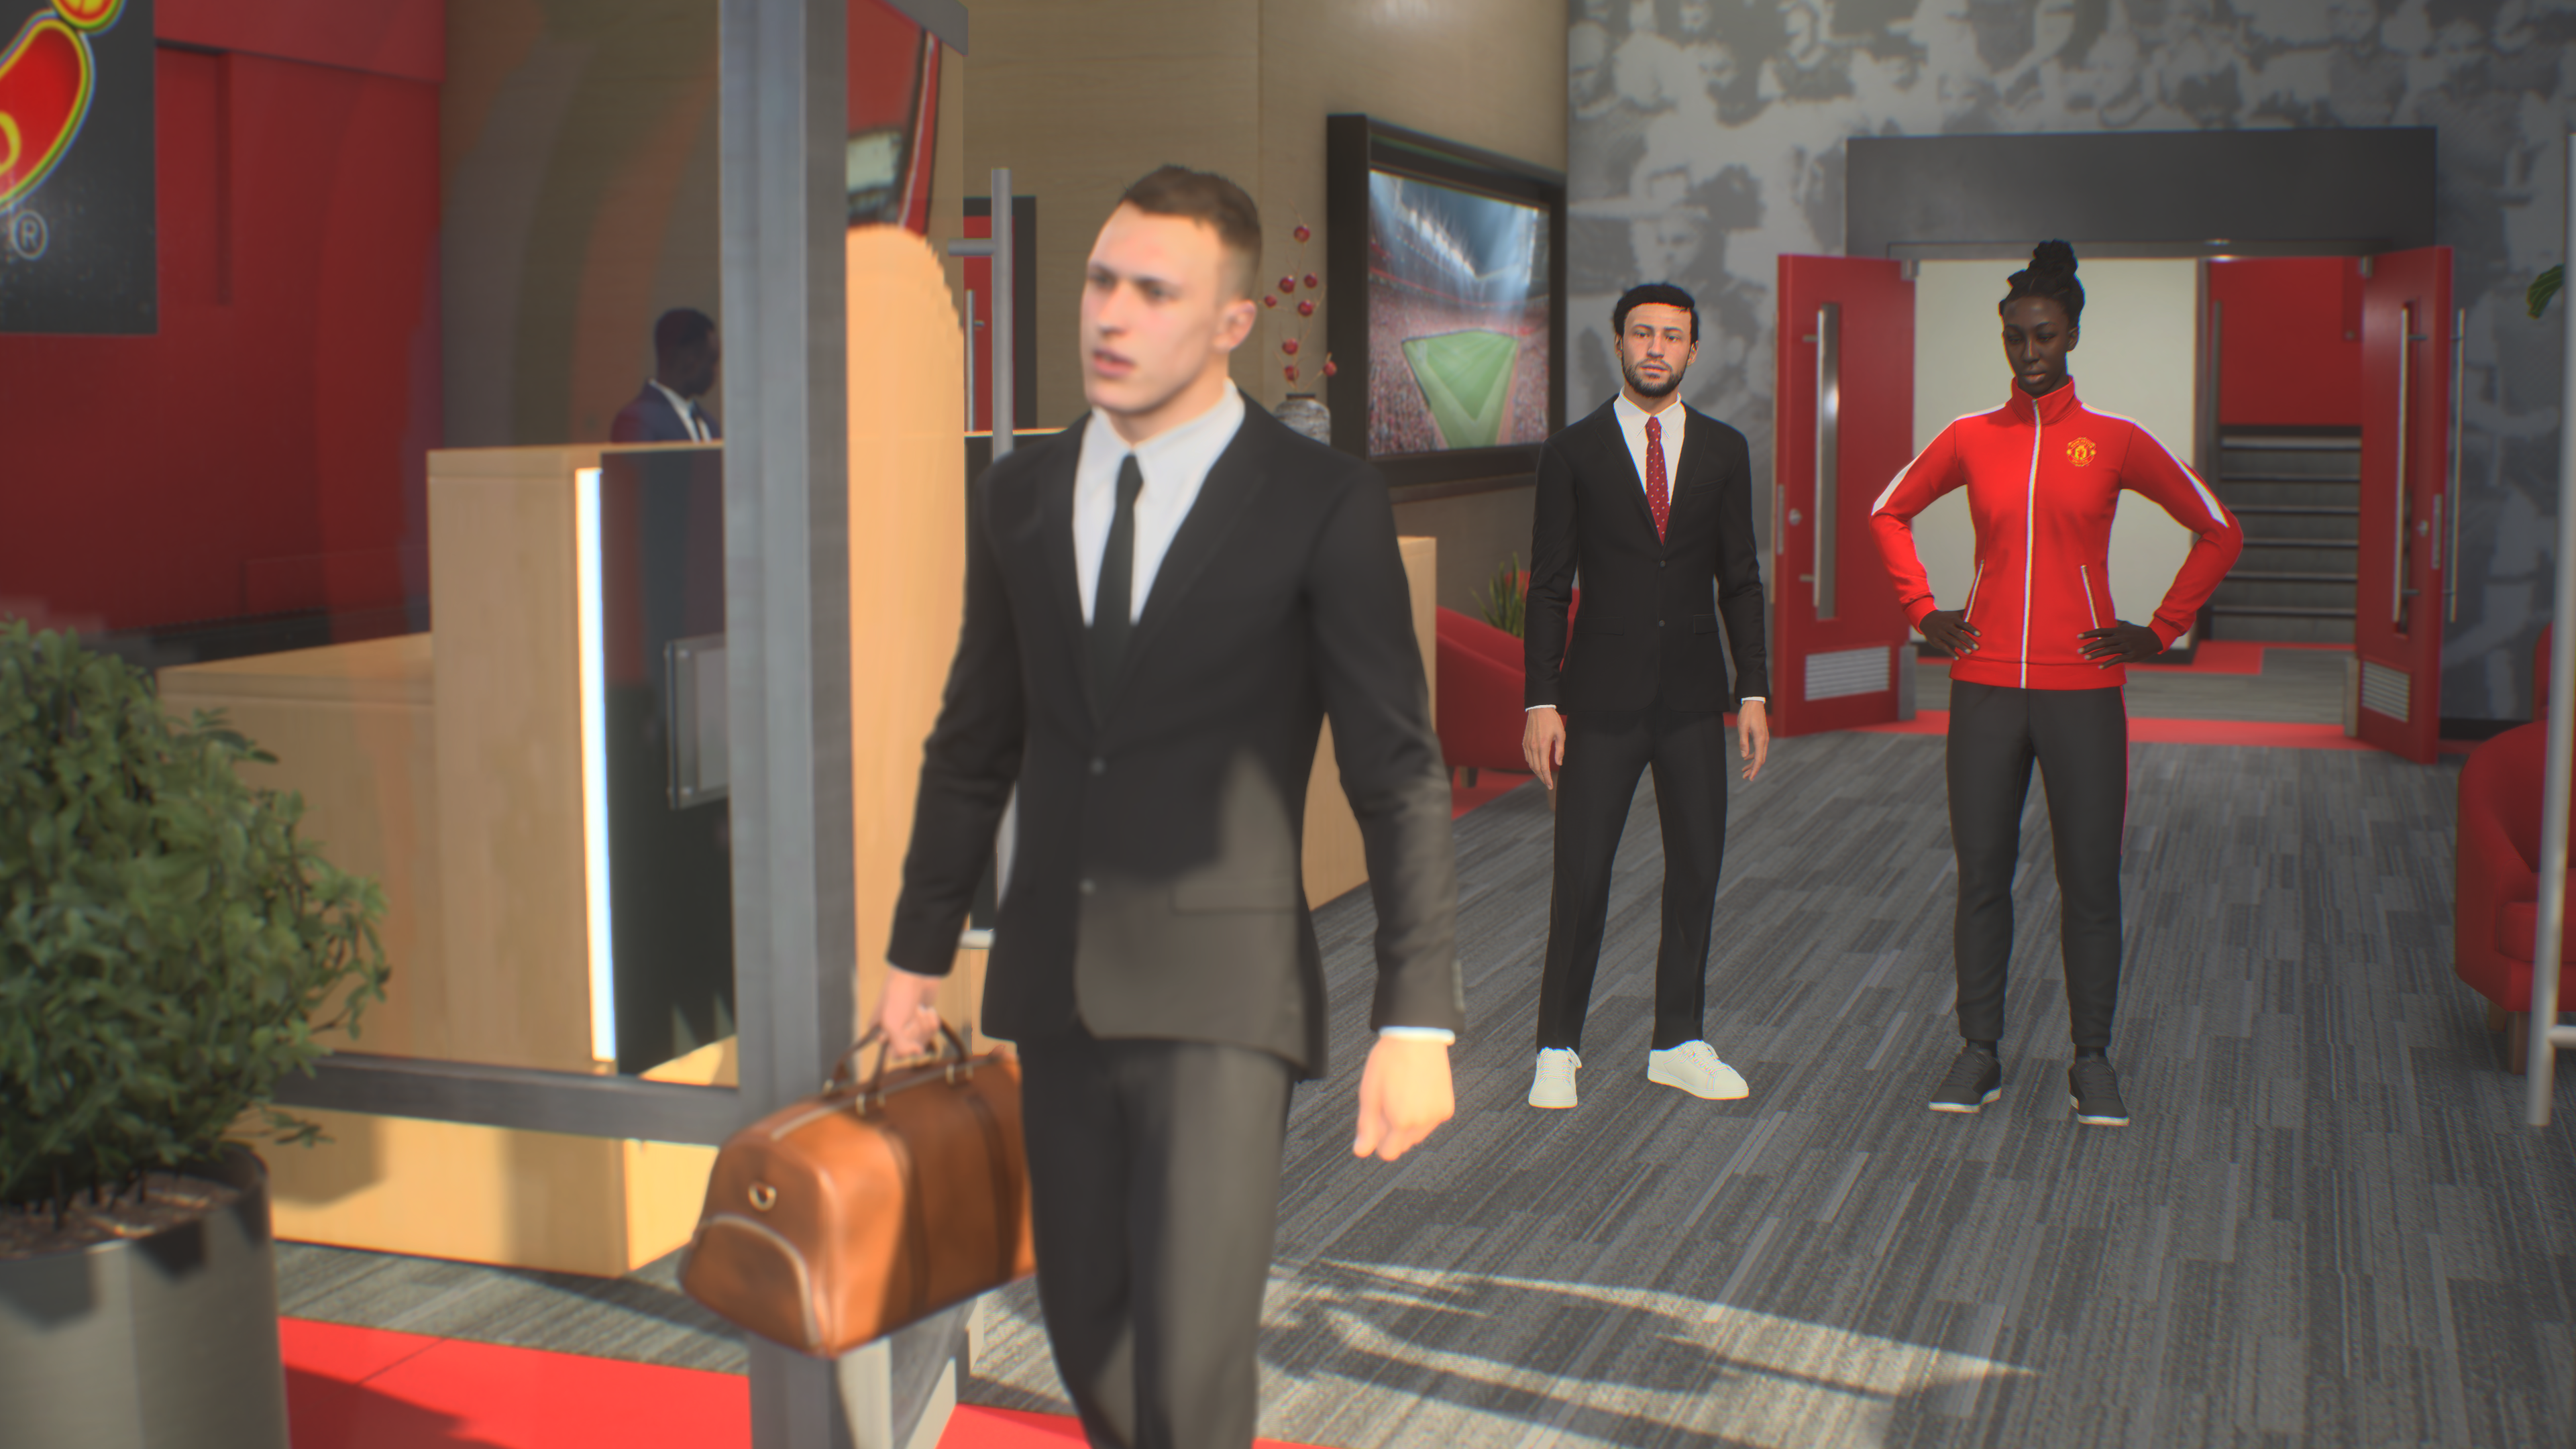 FIFA 23 review - cutscene showing Phil Jones walking out of the training ground looking sad as the manager and coach look on